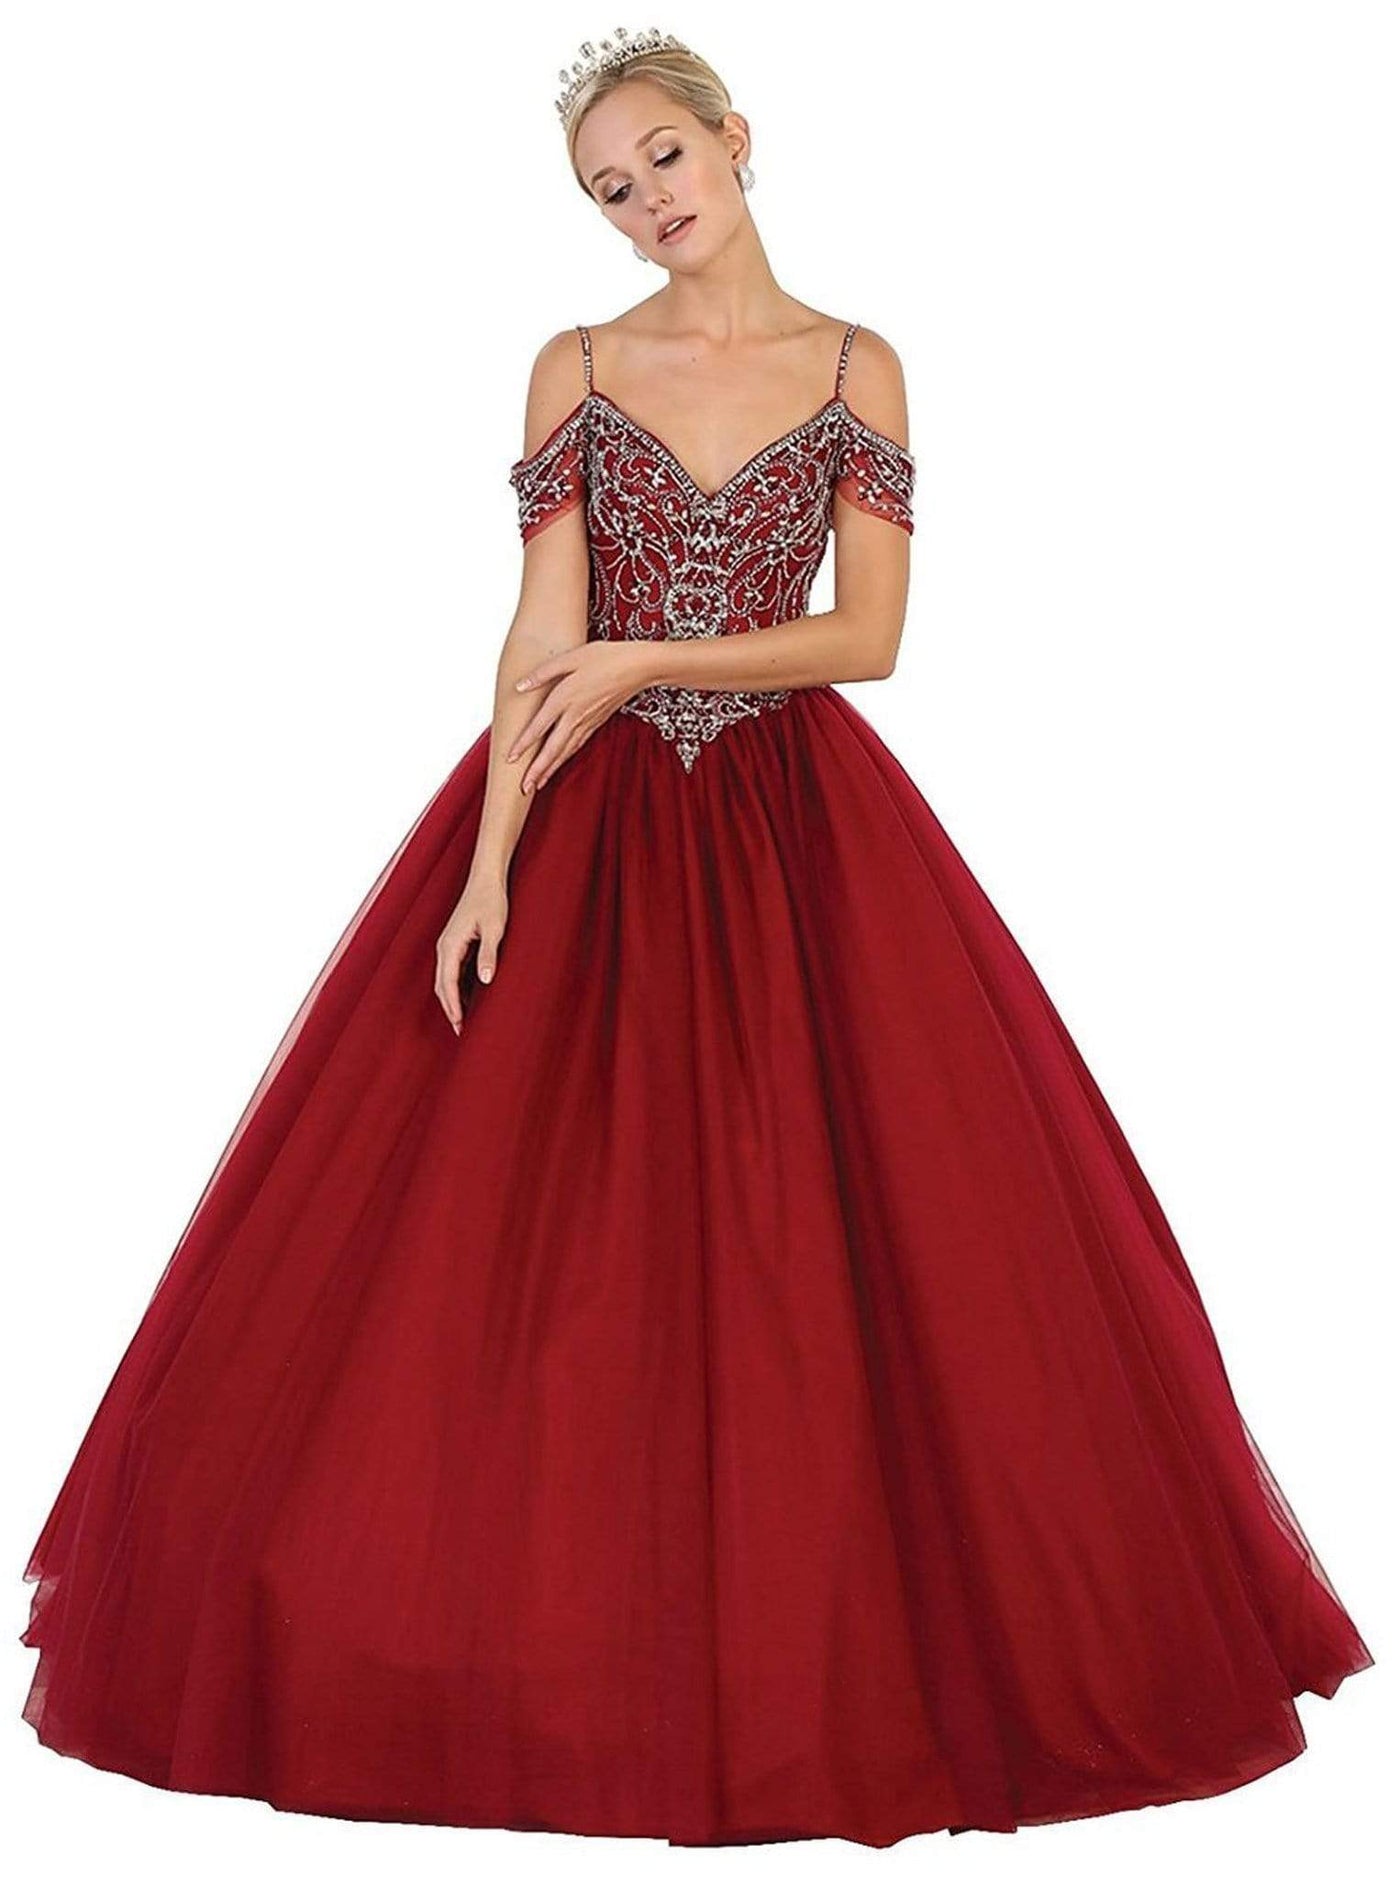 May Queen - LK96 Embellished V-neck Quinceanera Ballgown Special Occasion Dress 2 / Burgundy